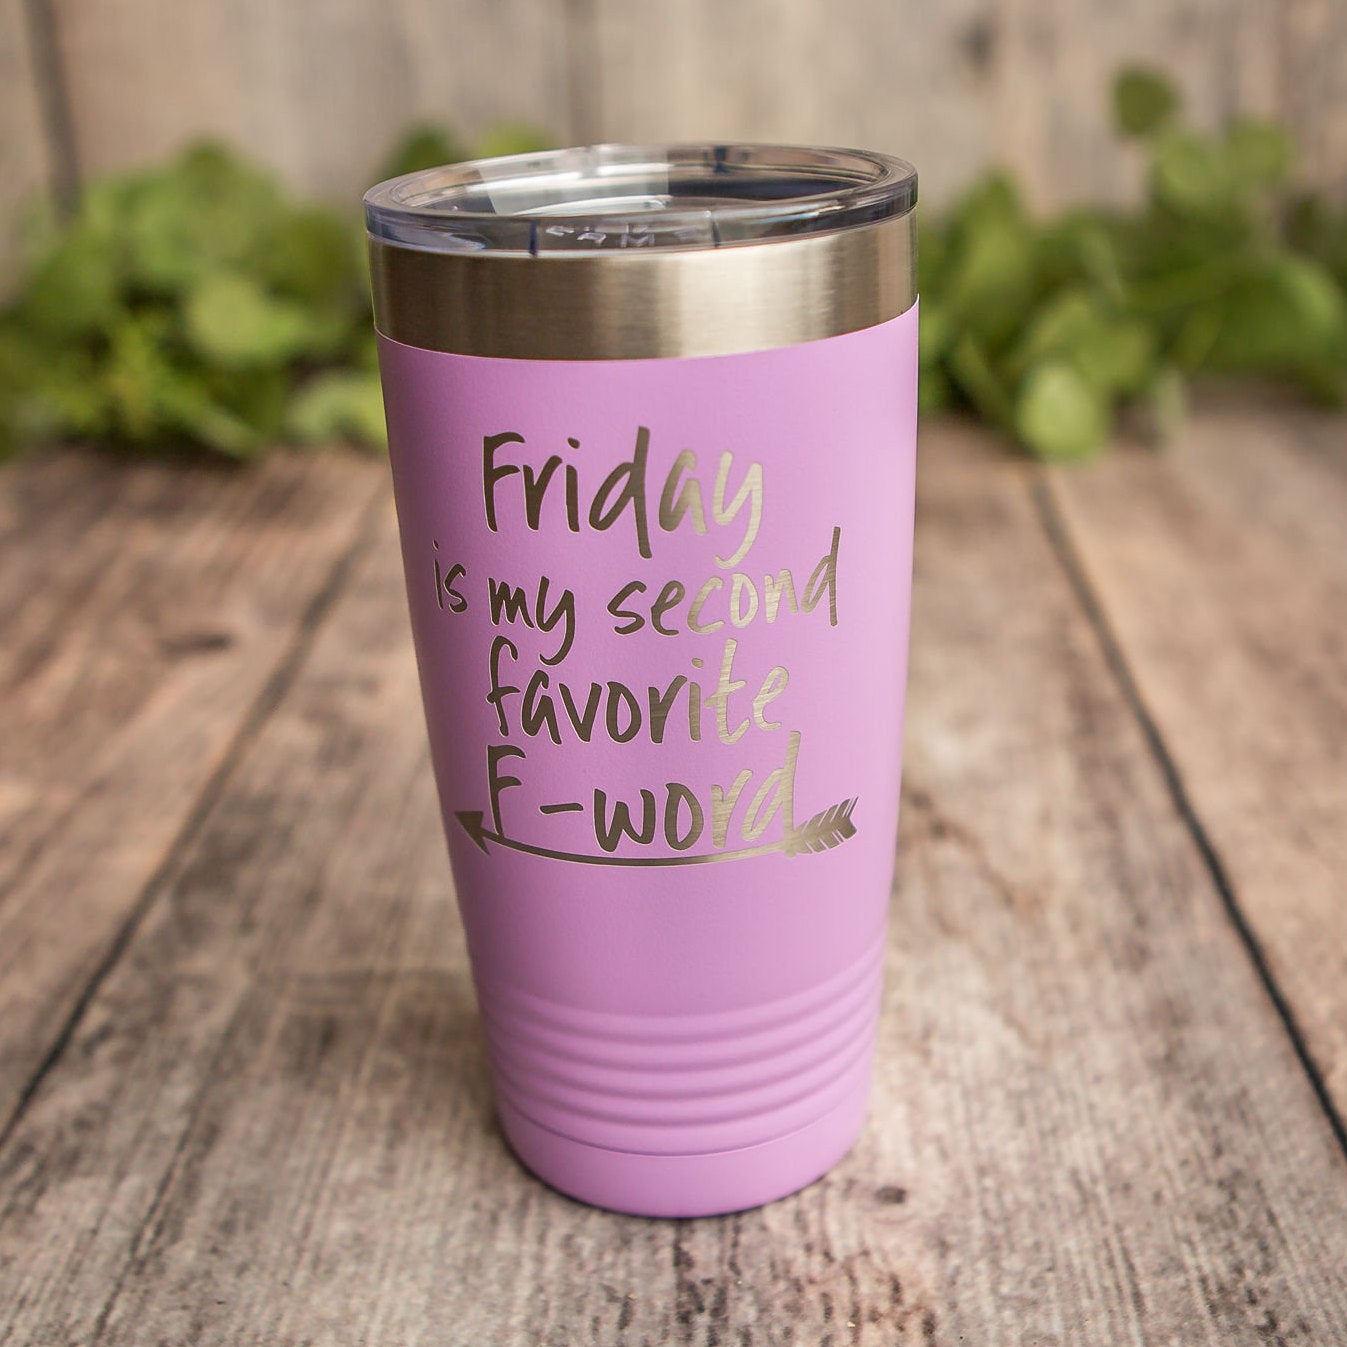 https://3cetching.com/wp-content/uploads/2020/09/friday-funny-engraved-tumbler-insulated-travel-mug-funny-friday-gift-cup-5f5fae3d.jpg